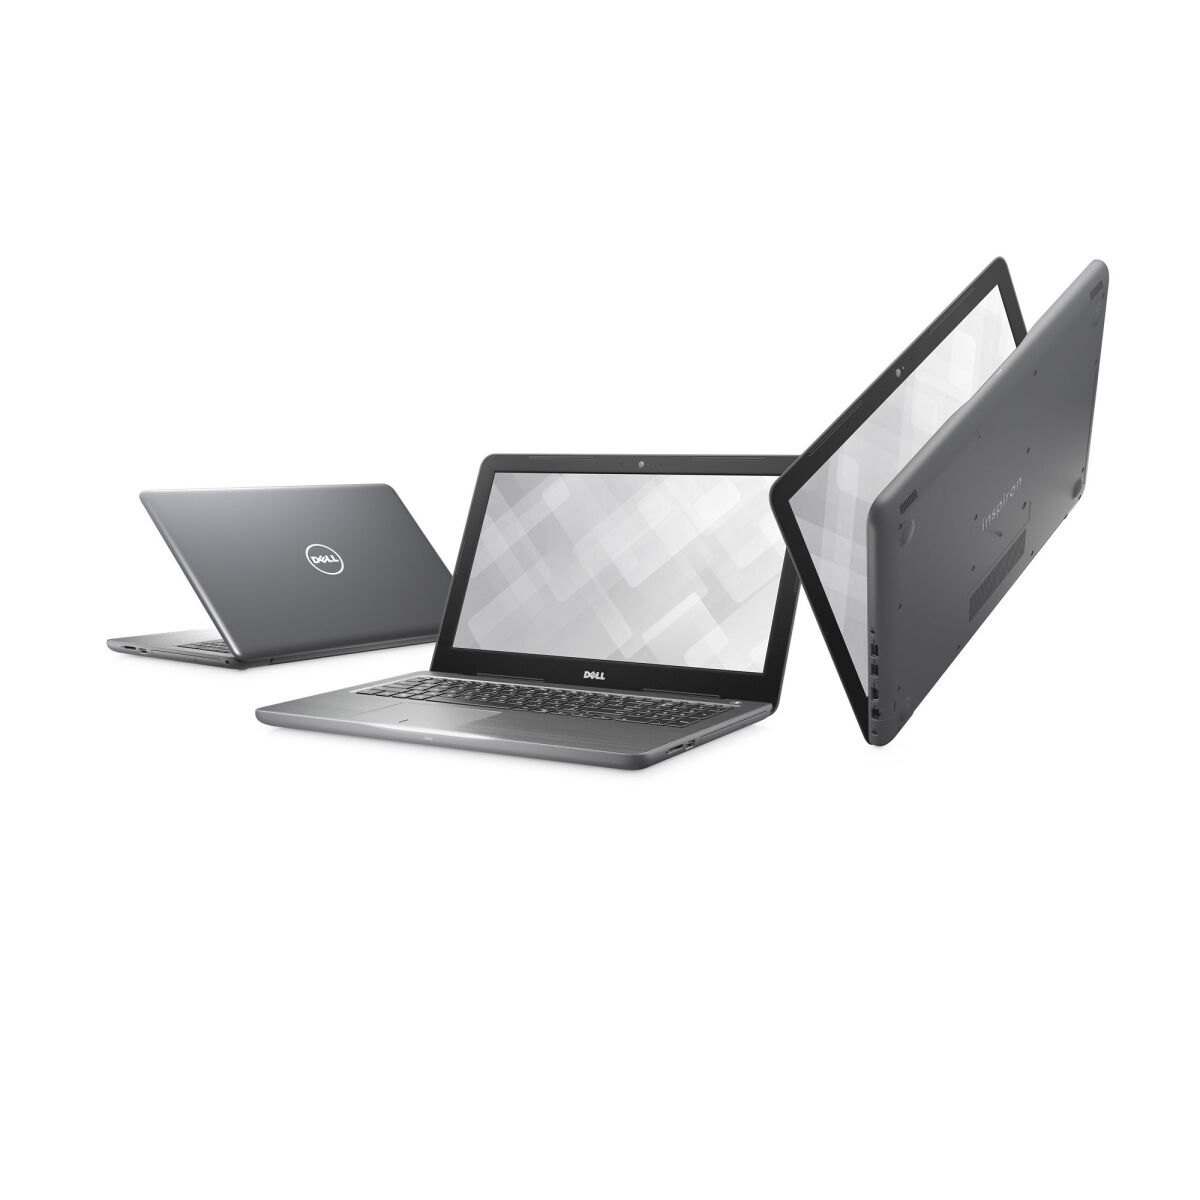 PC/タブレット ノートPC DELL Inspiron 5567 - P66F001-TI78104 laptop specifications